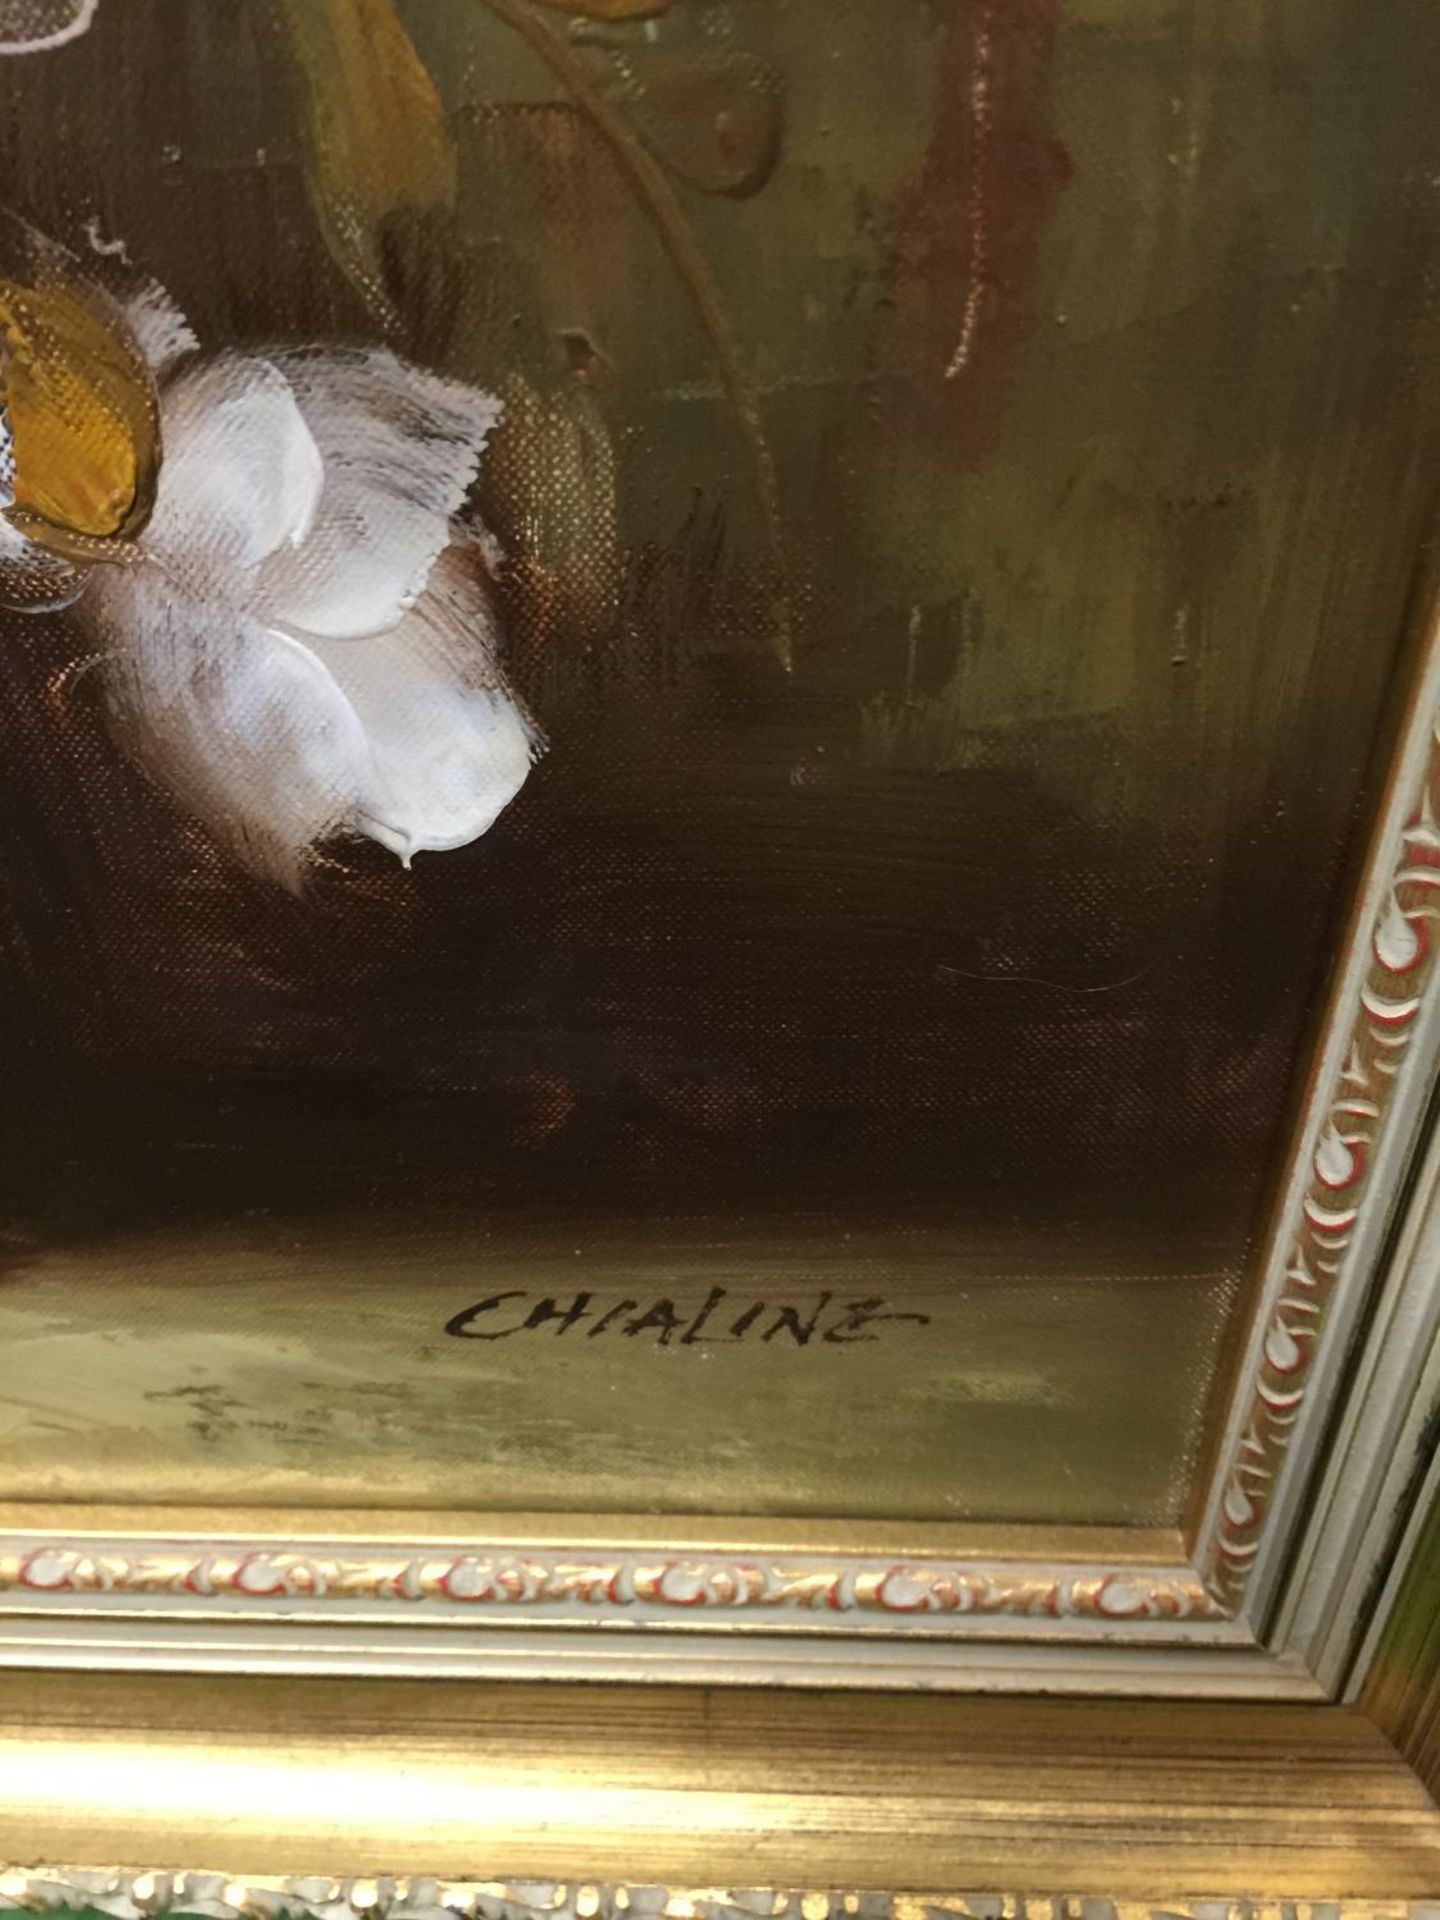 TWO GILT FRAMED OIL ON CANVAS STILL LIFE PAINTINGS ONE WITH THE SIGNATURE 'CHIALINE' - Image 3 of 3